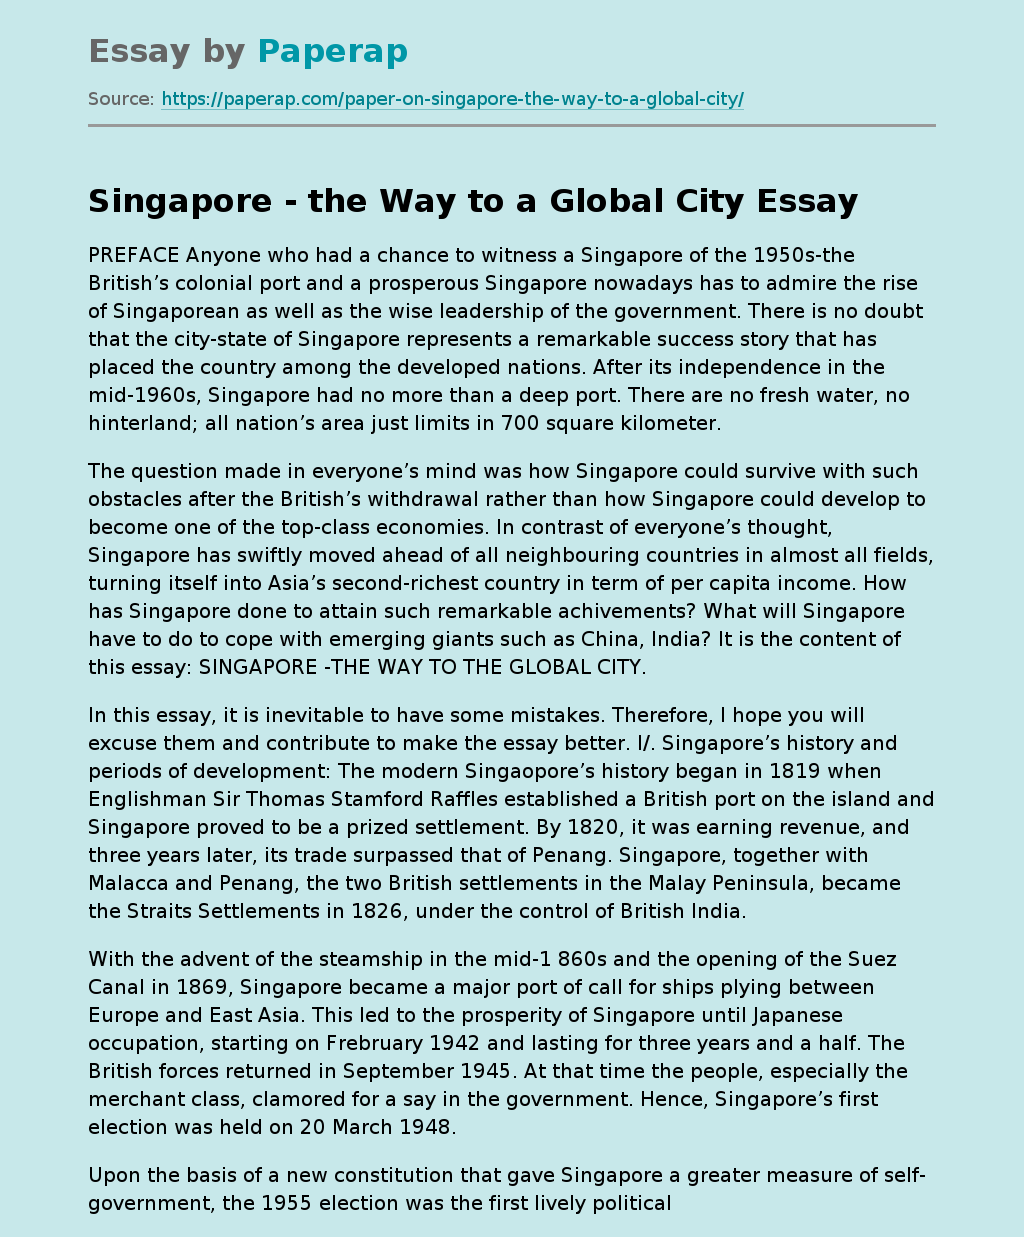 Singapore - the Way to a Global City